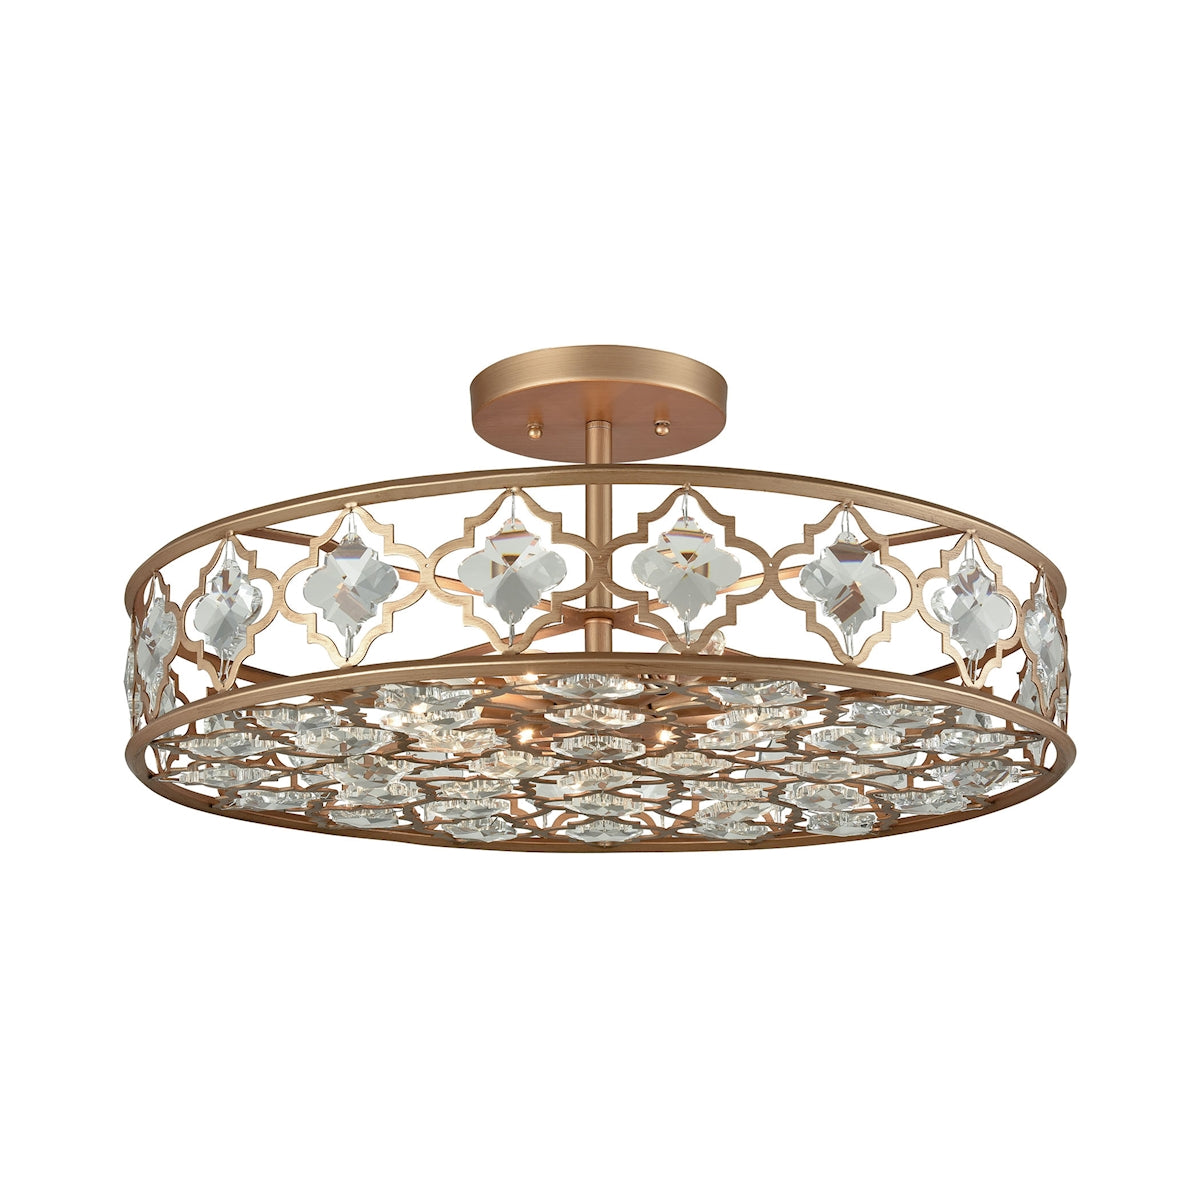 ELK Lighting 32093/8 Armand 8-Light Semi Flush in Matte Gold with Clear Crystals